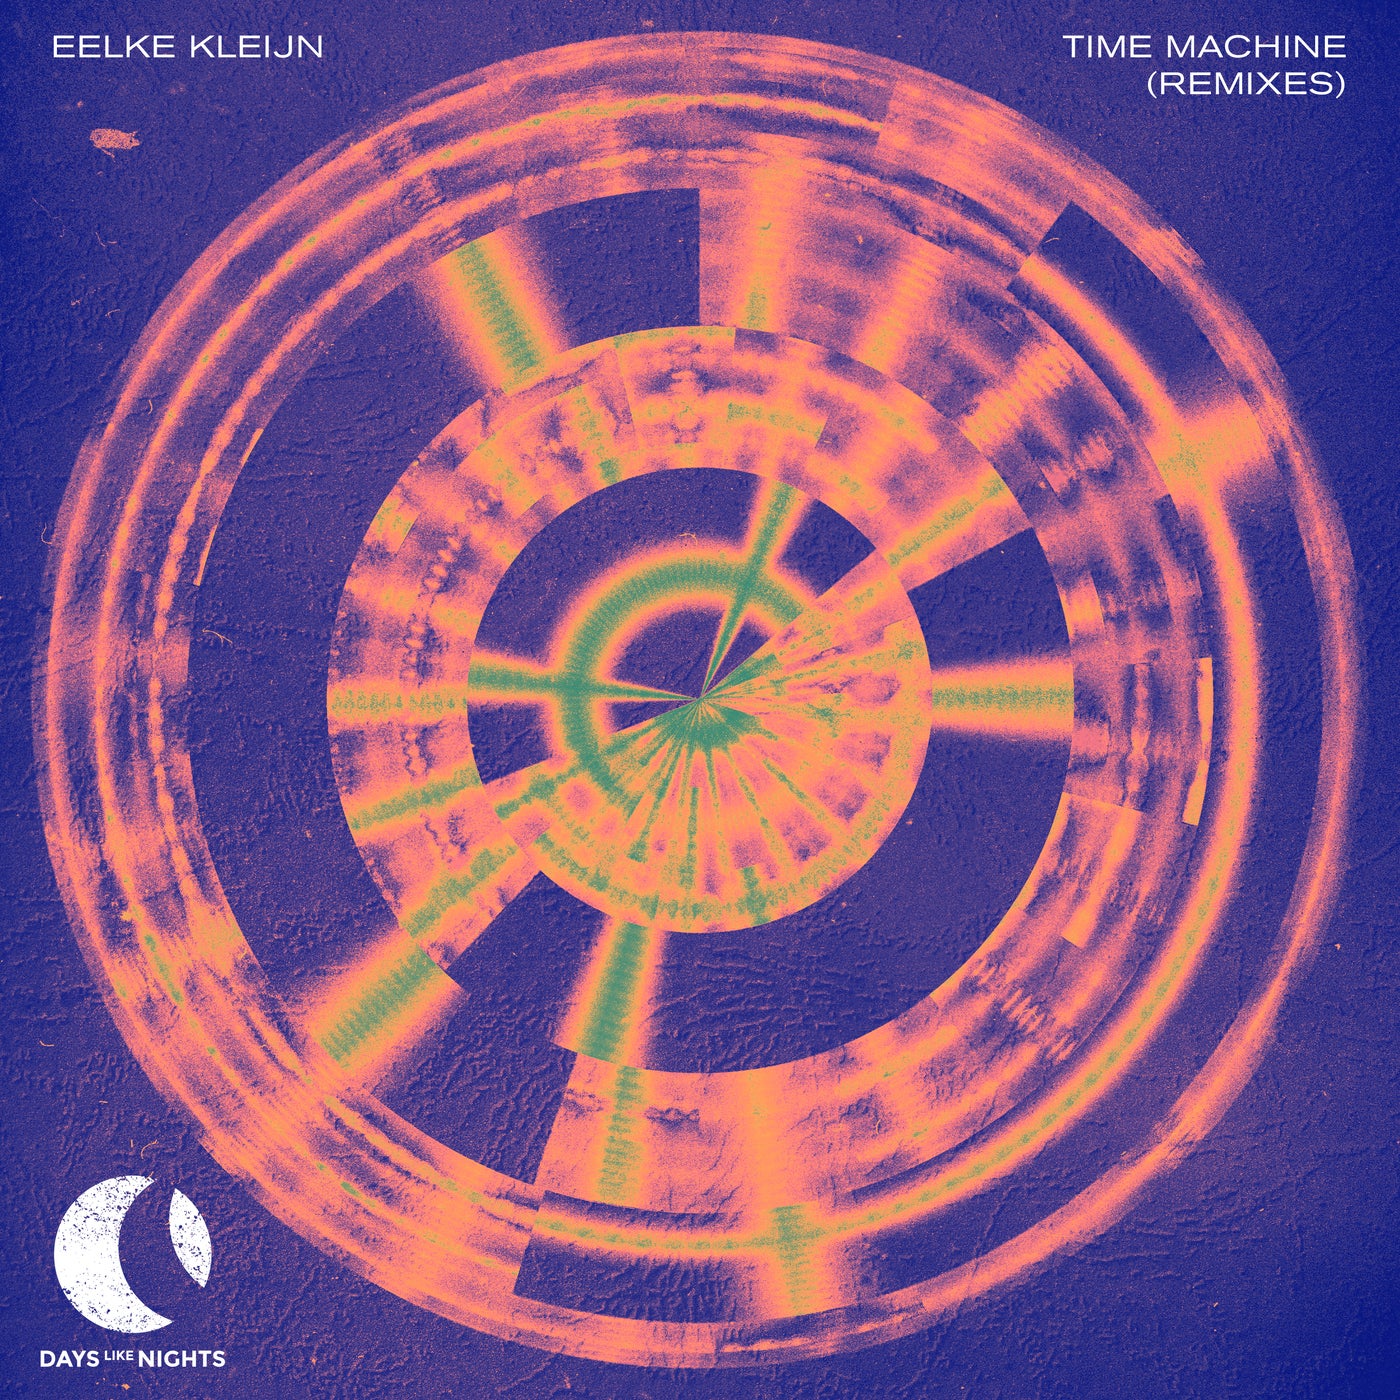 image cover: Eelke Kleijn - Time Machine - Remixes on DAYS like NIGHTS